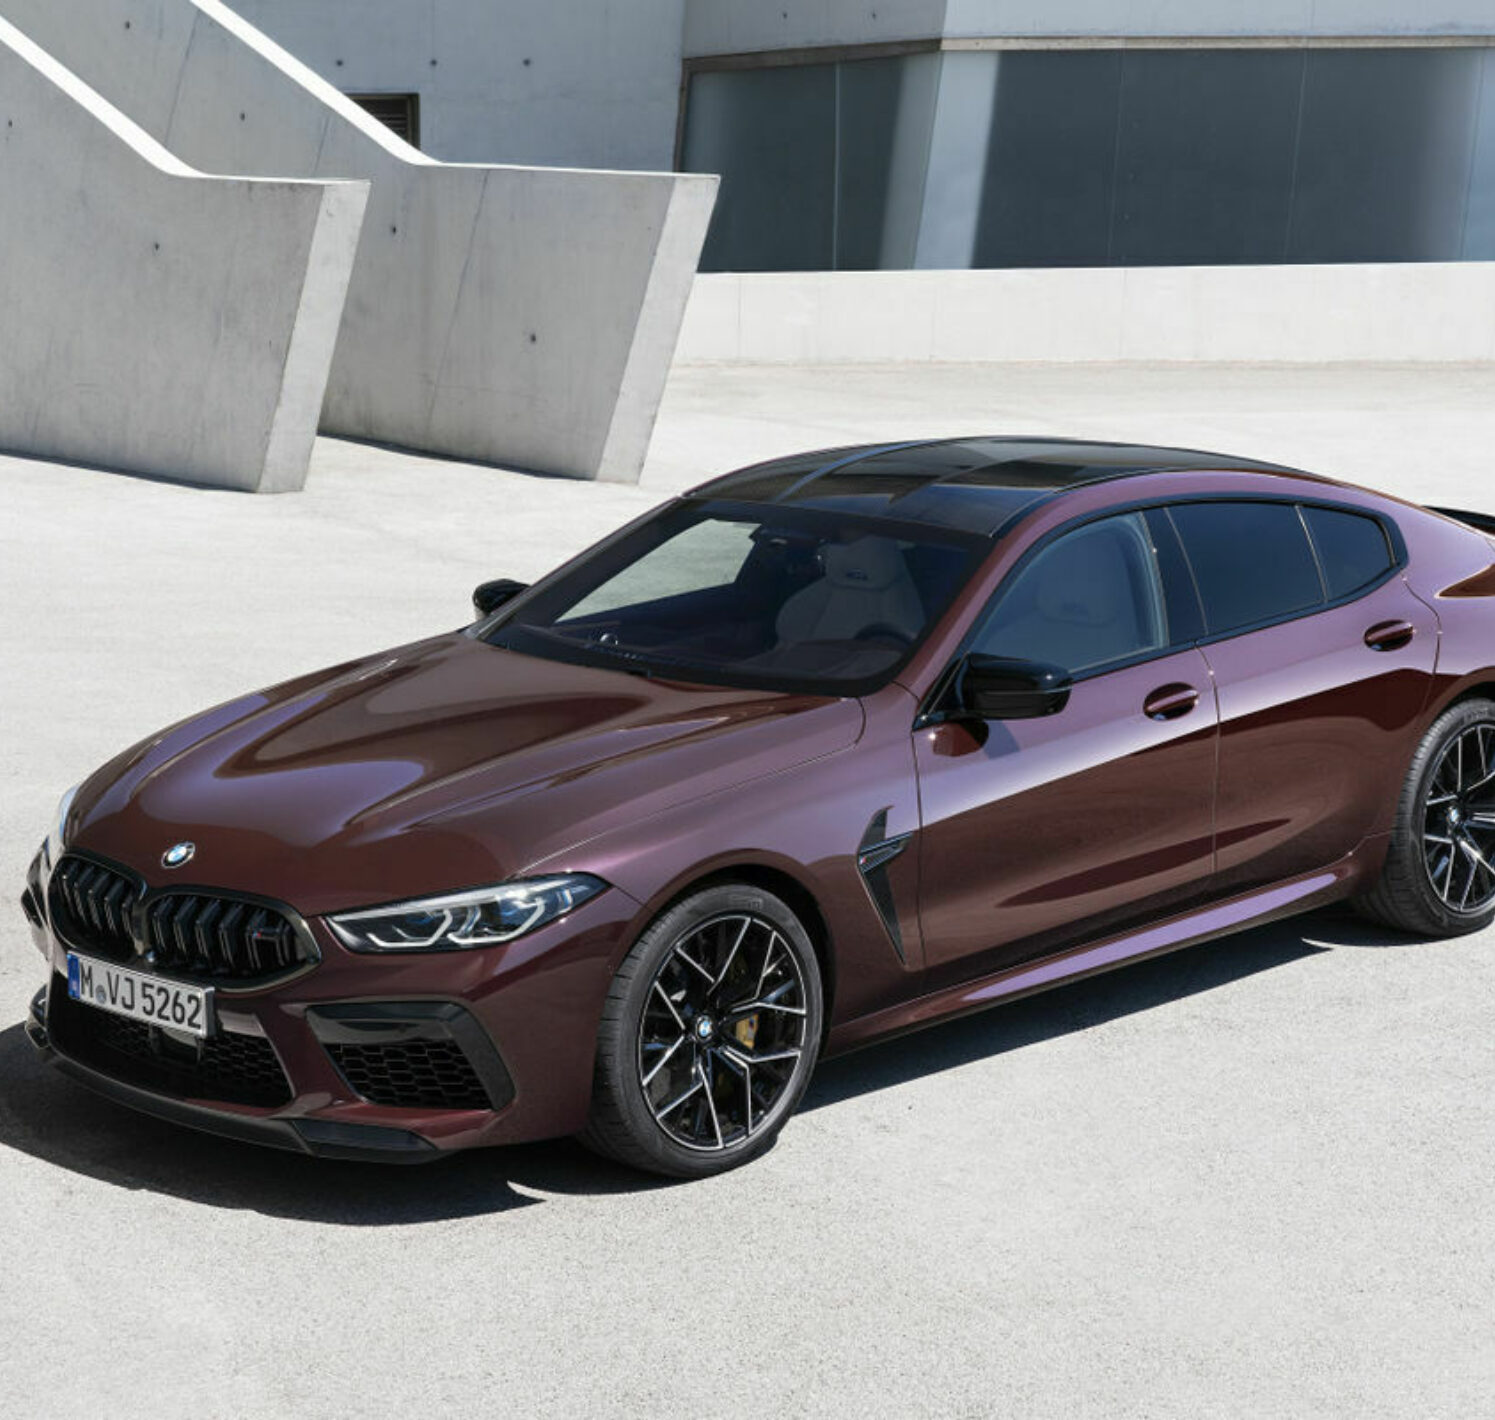 https://autofilter.sk/assets/images/rad-8-gran-coupe-2/gallery/p90369575-high-res-the-new-bmw-m8-gran-galeria.jpg - obrazok